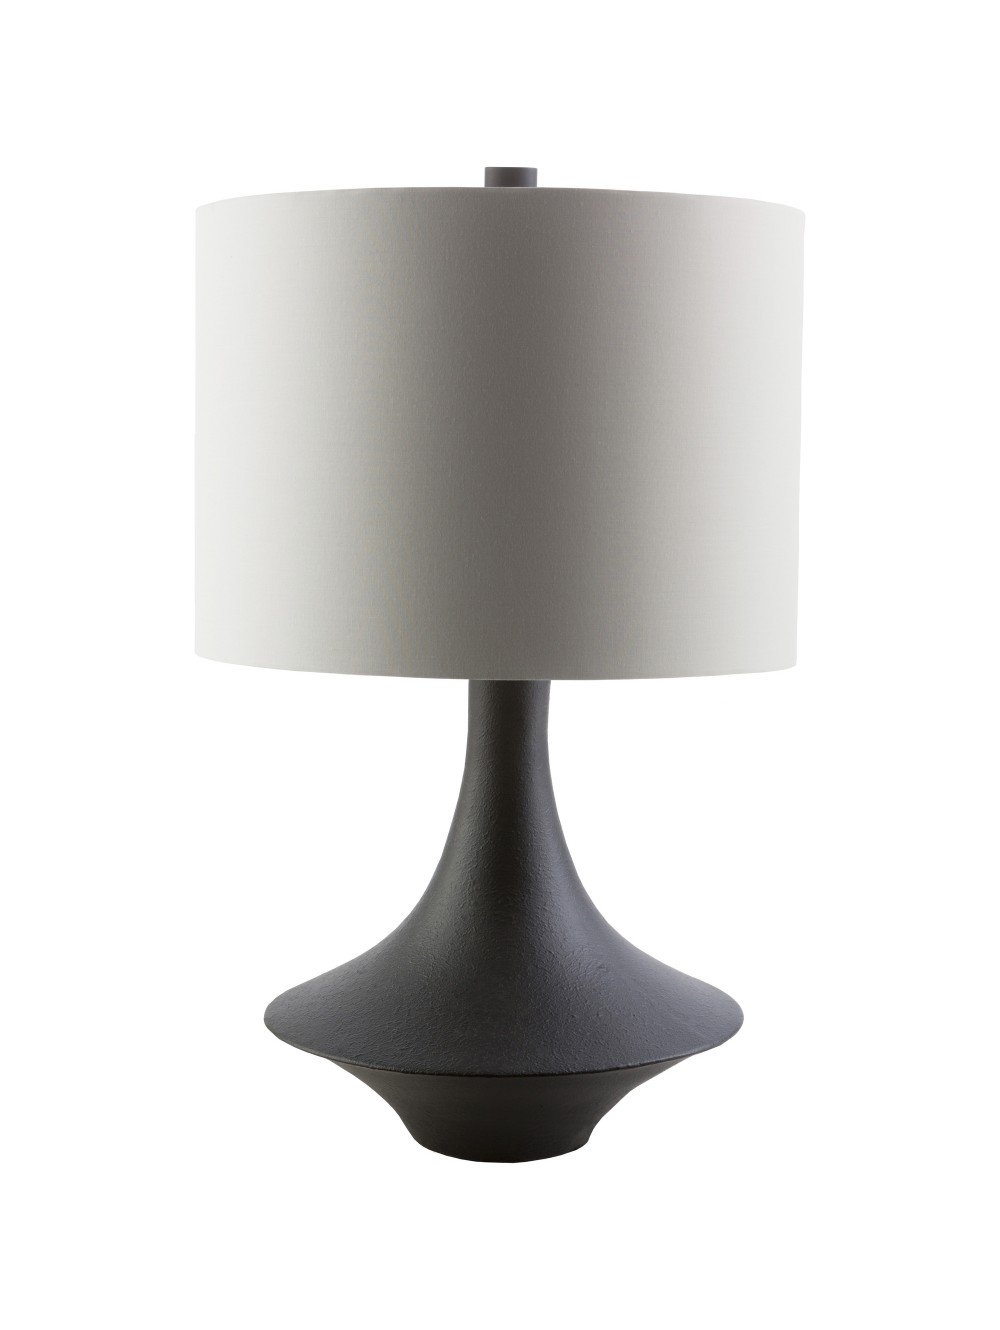 COULWOOD TABLE LAMP, BLACK - Image 0